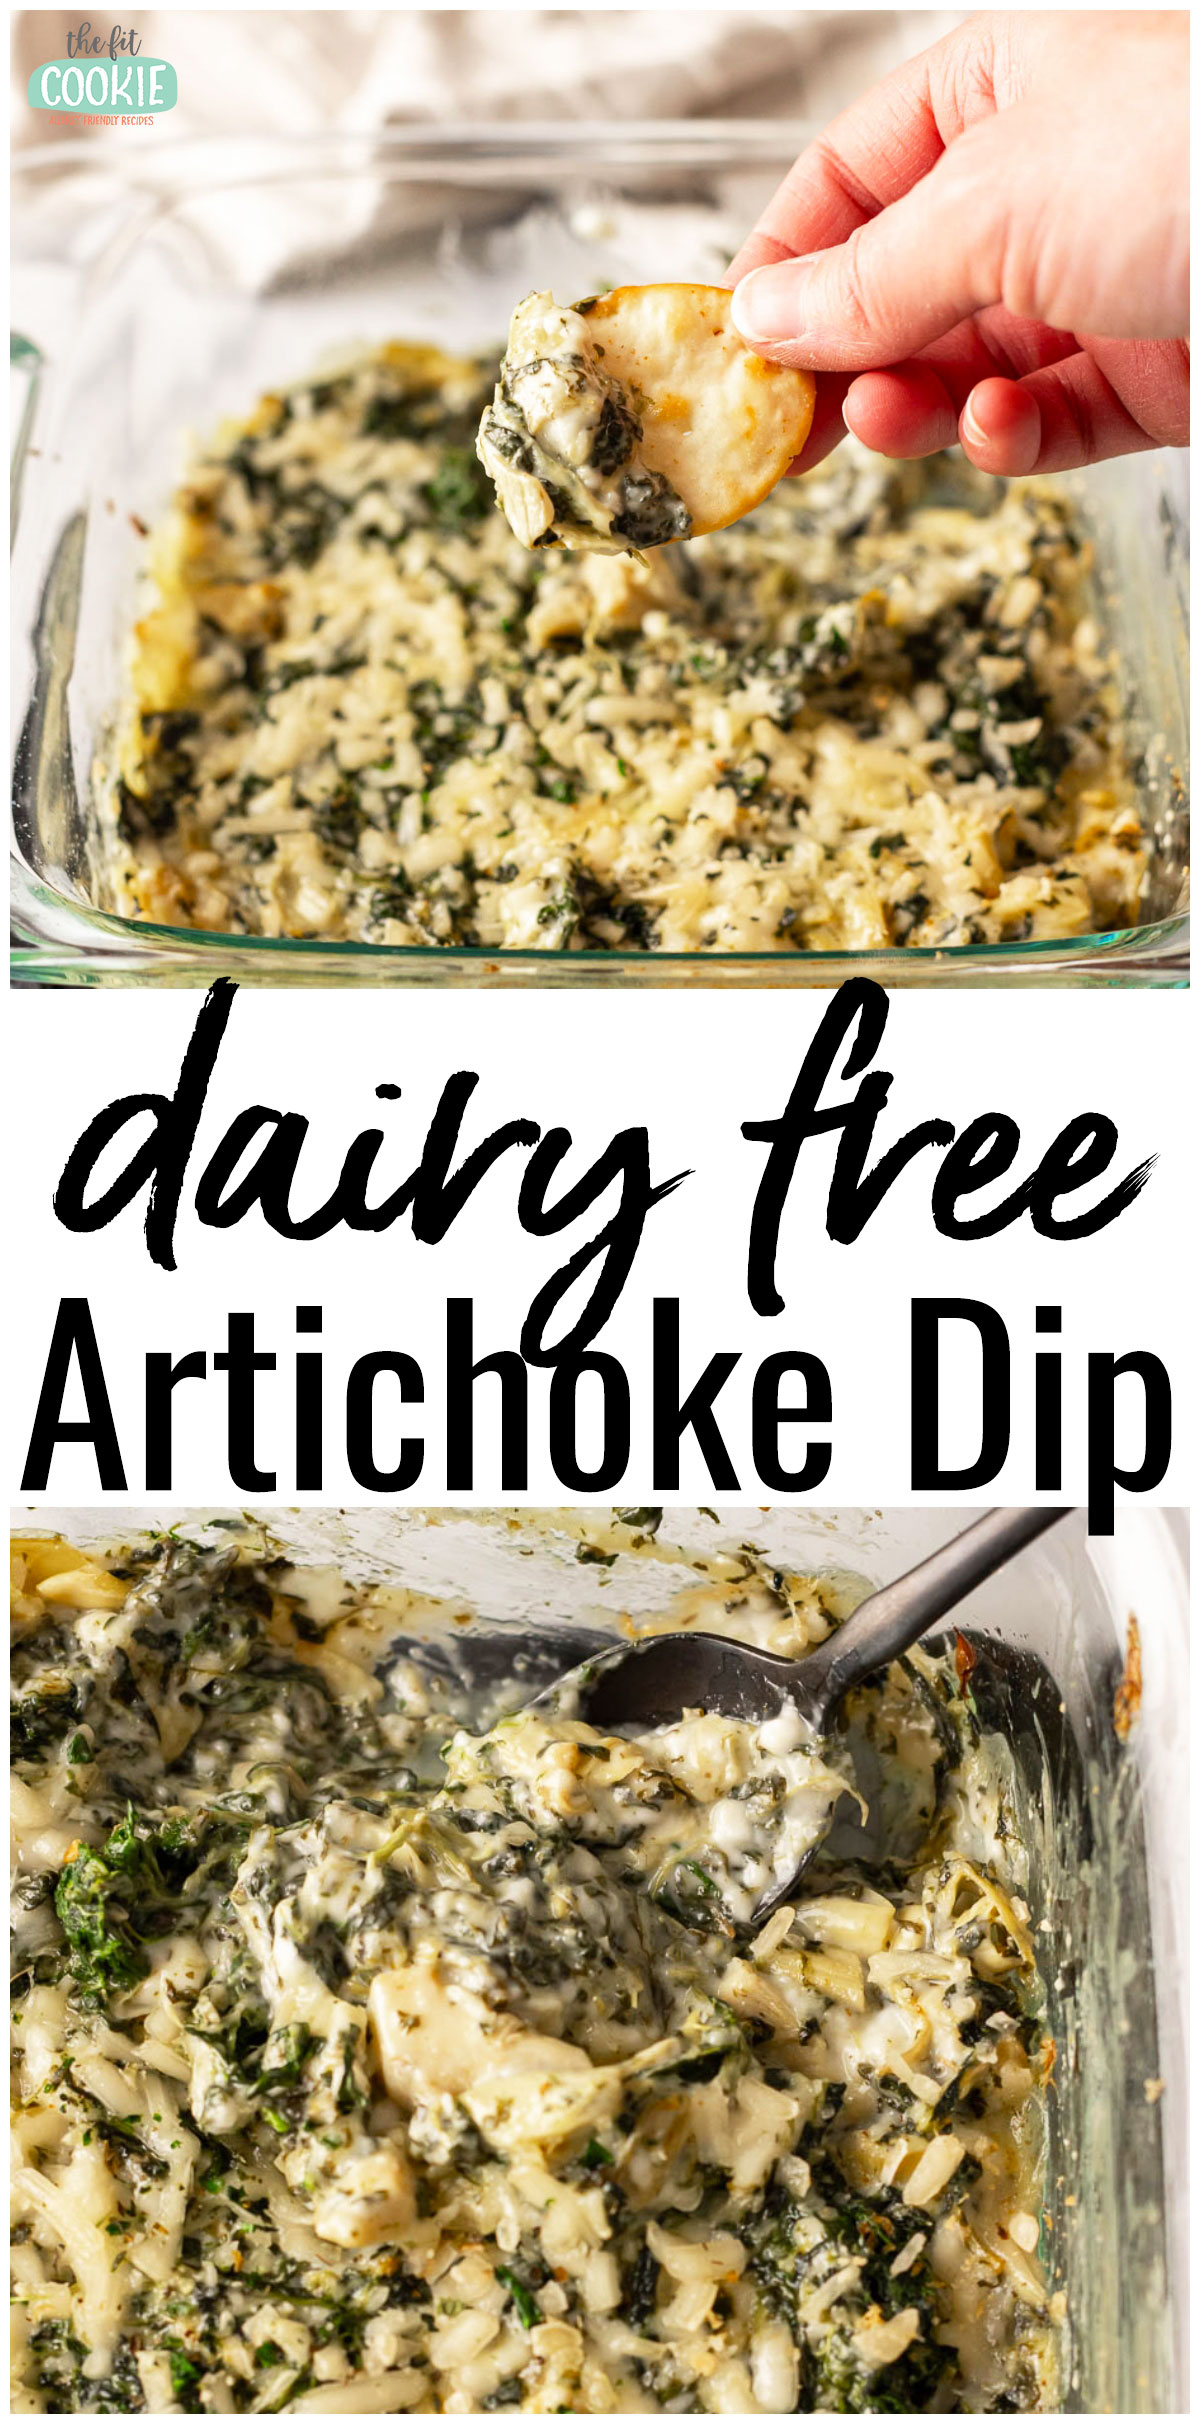 photo collage showing 2 views of dairy free spinach artichoke dip with text overlay that says "dairy free artichoke dip".